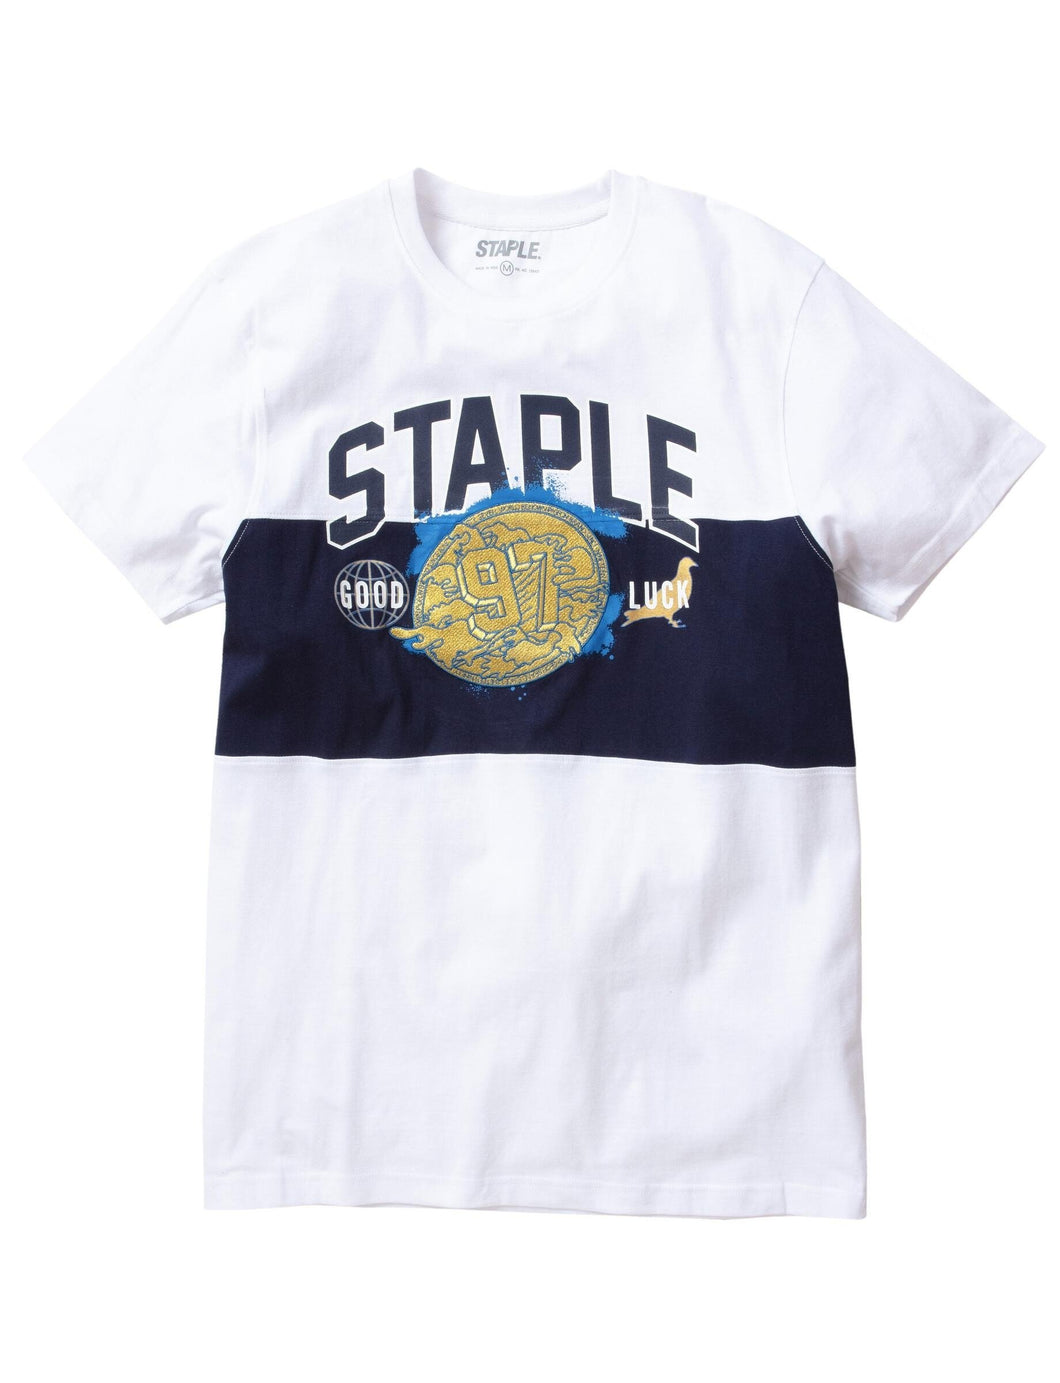 Buy Staple Gold Medal Embroidered T-shirt - Navy - Swaggerlikeme.com / Grand General Store